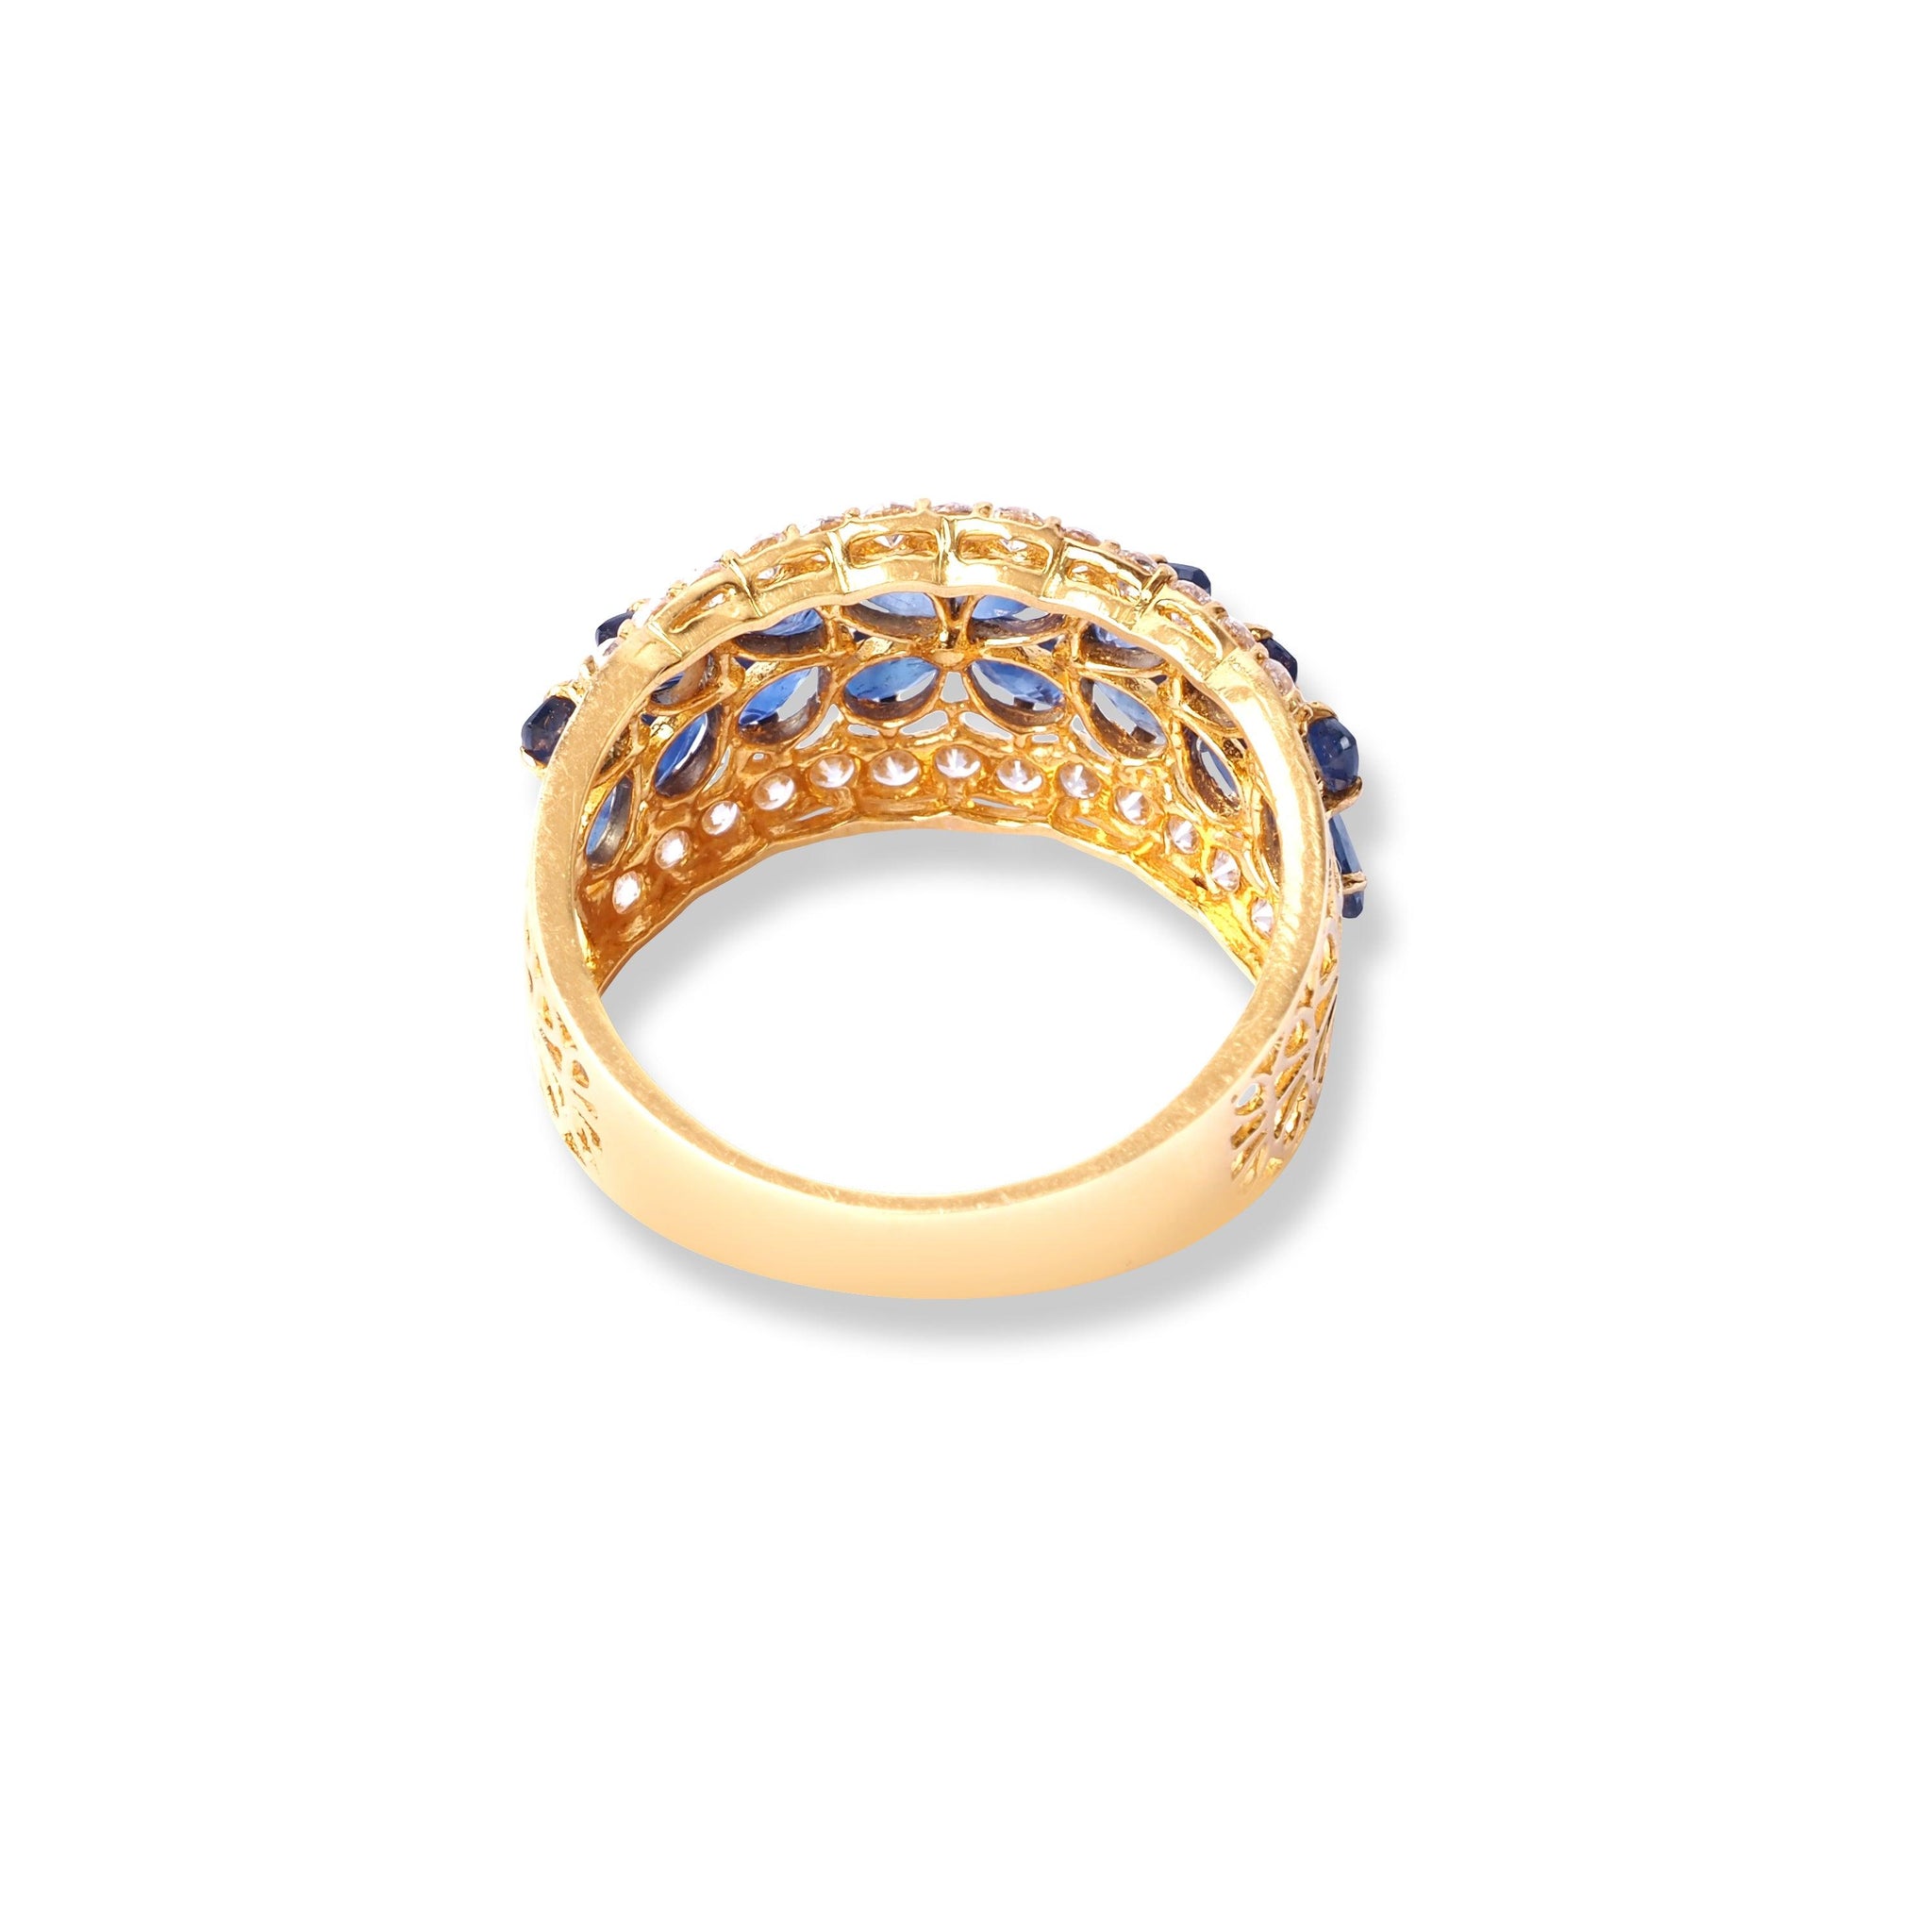 22ct Gold Ring With Blue Coloured Stones & Cubic Zirconia Stones (4.7g) LR-6597